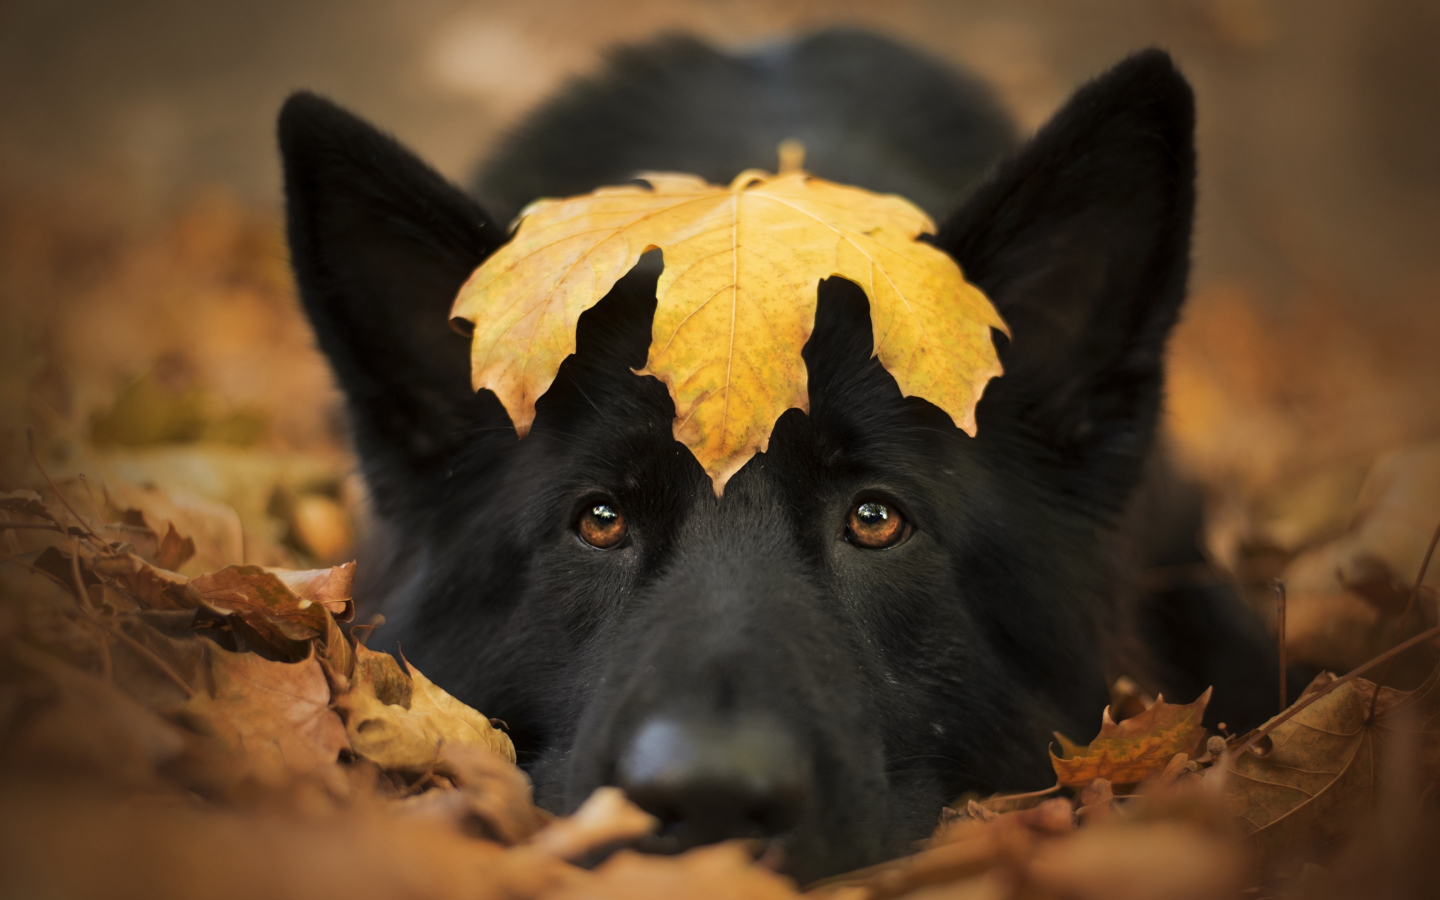 Dog and autumn, cute stare, close up, 1440x900 wallpaper